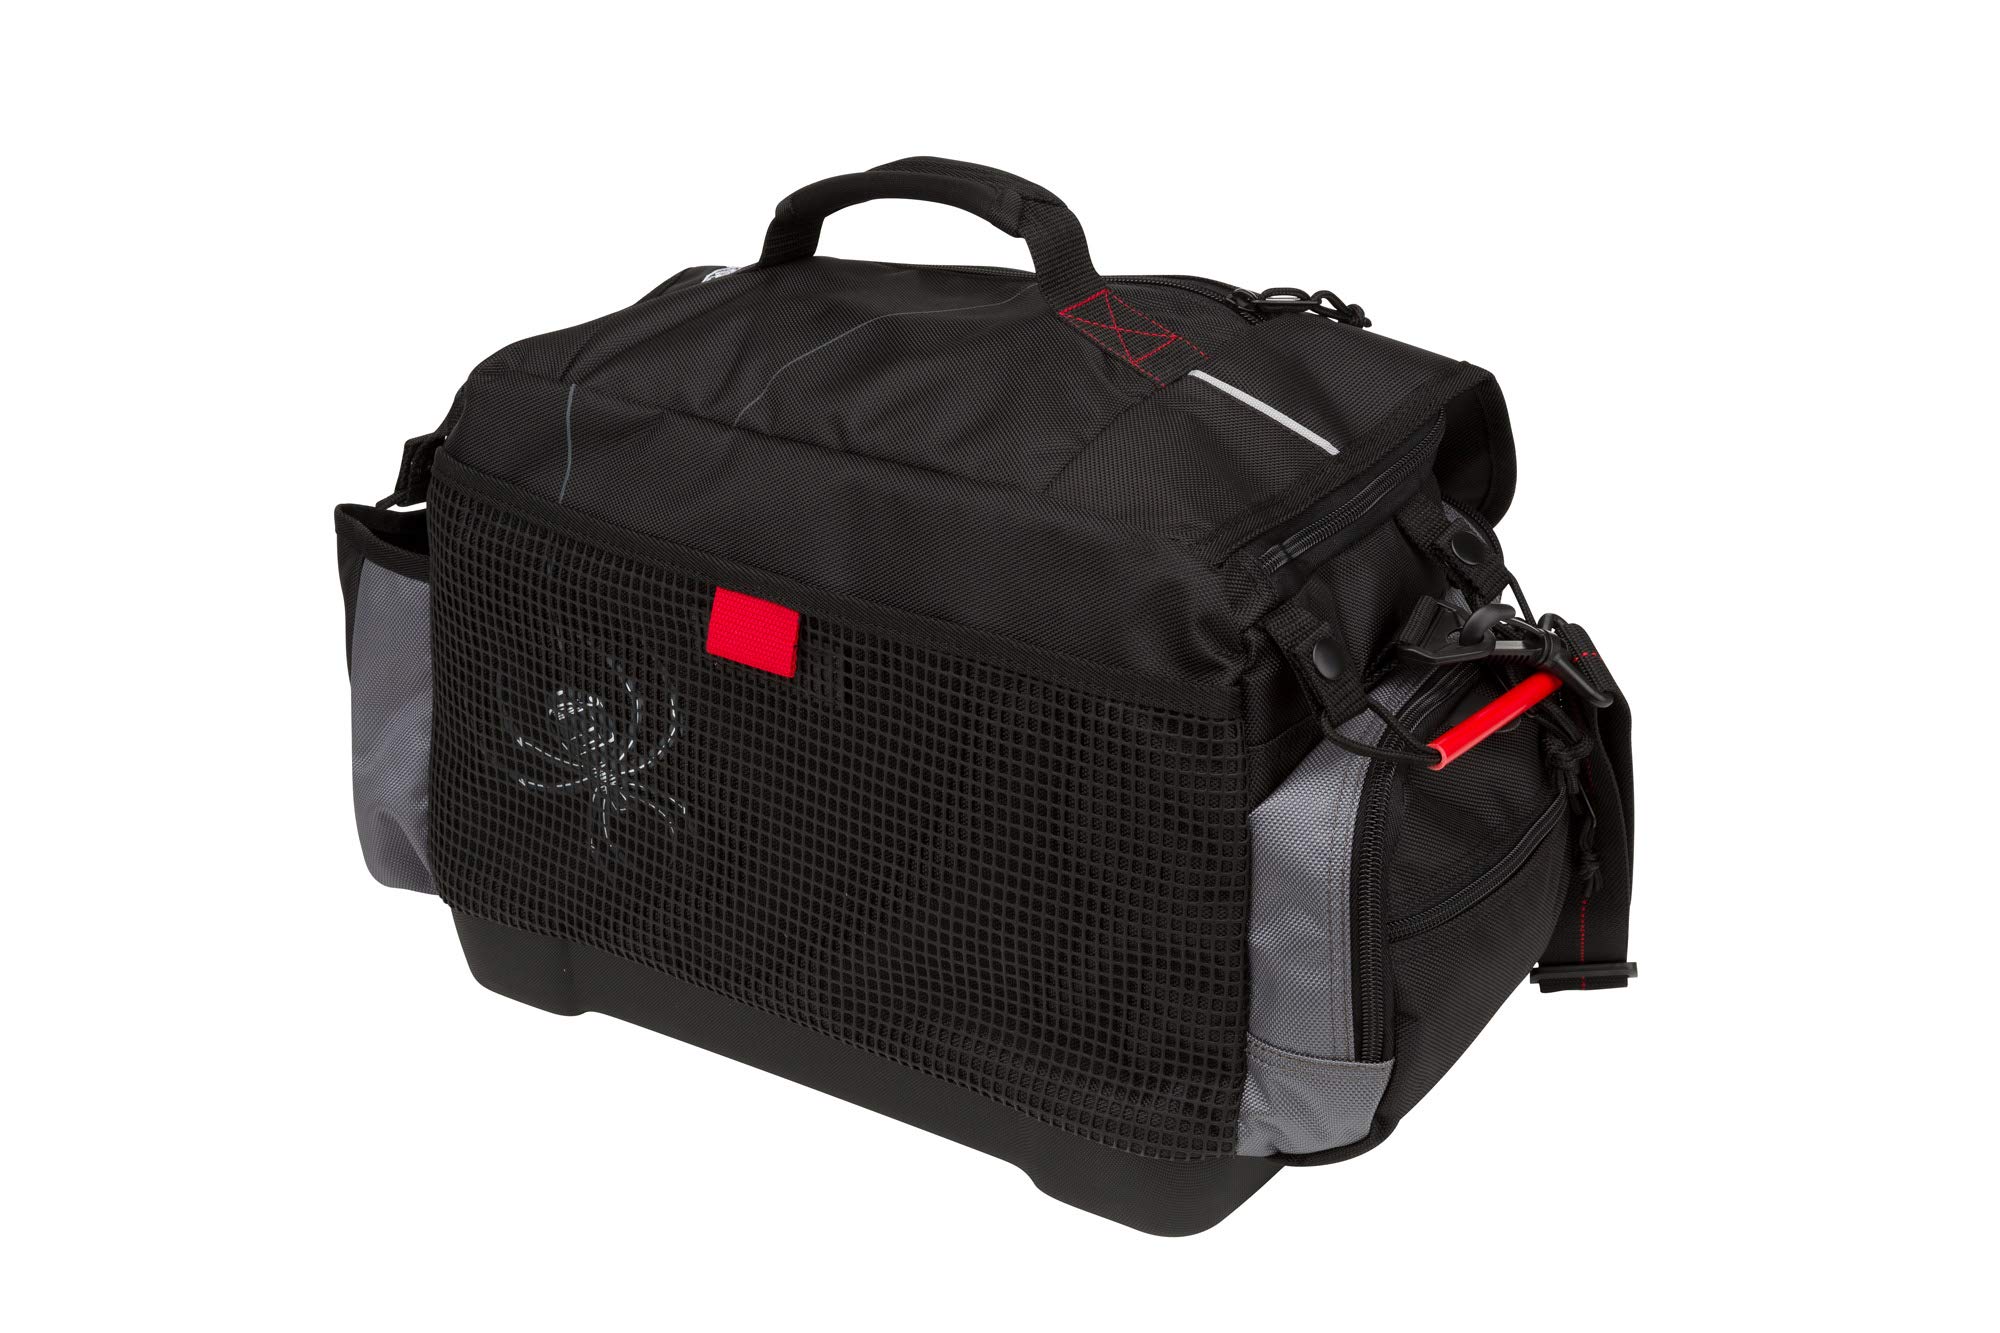 Spiderwire Wolf Tackle Bag, 38.8-Liter - image 5 of 9